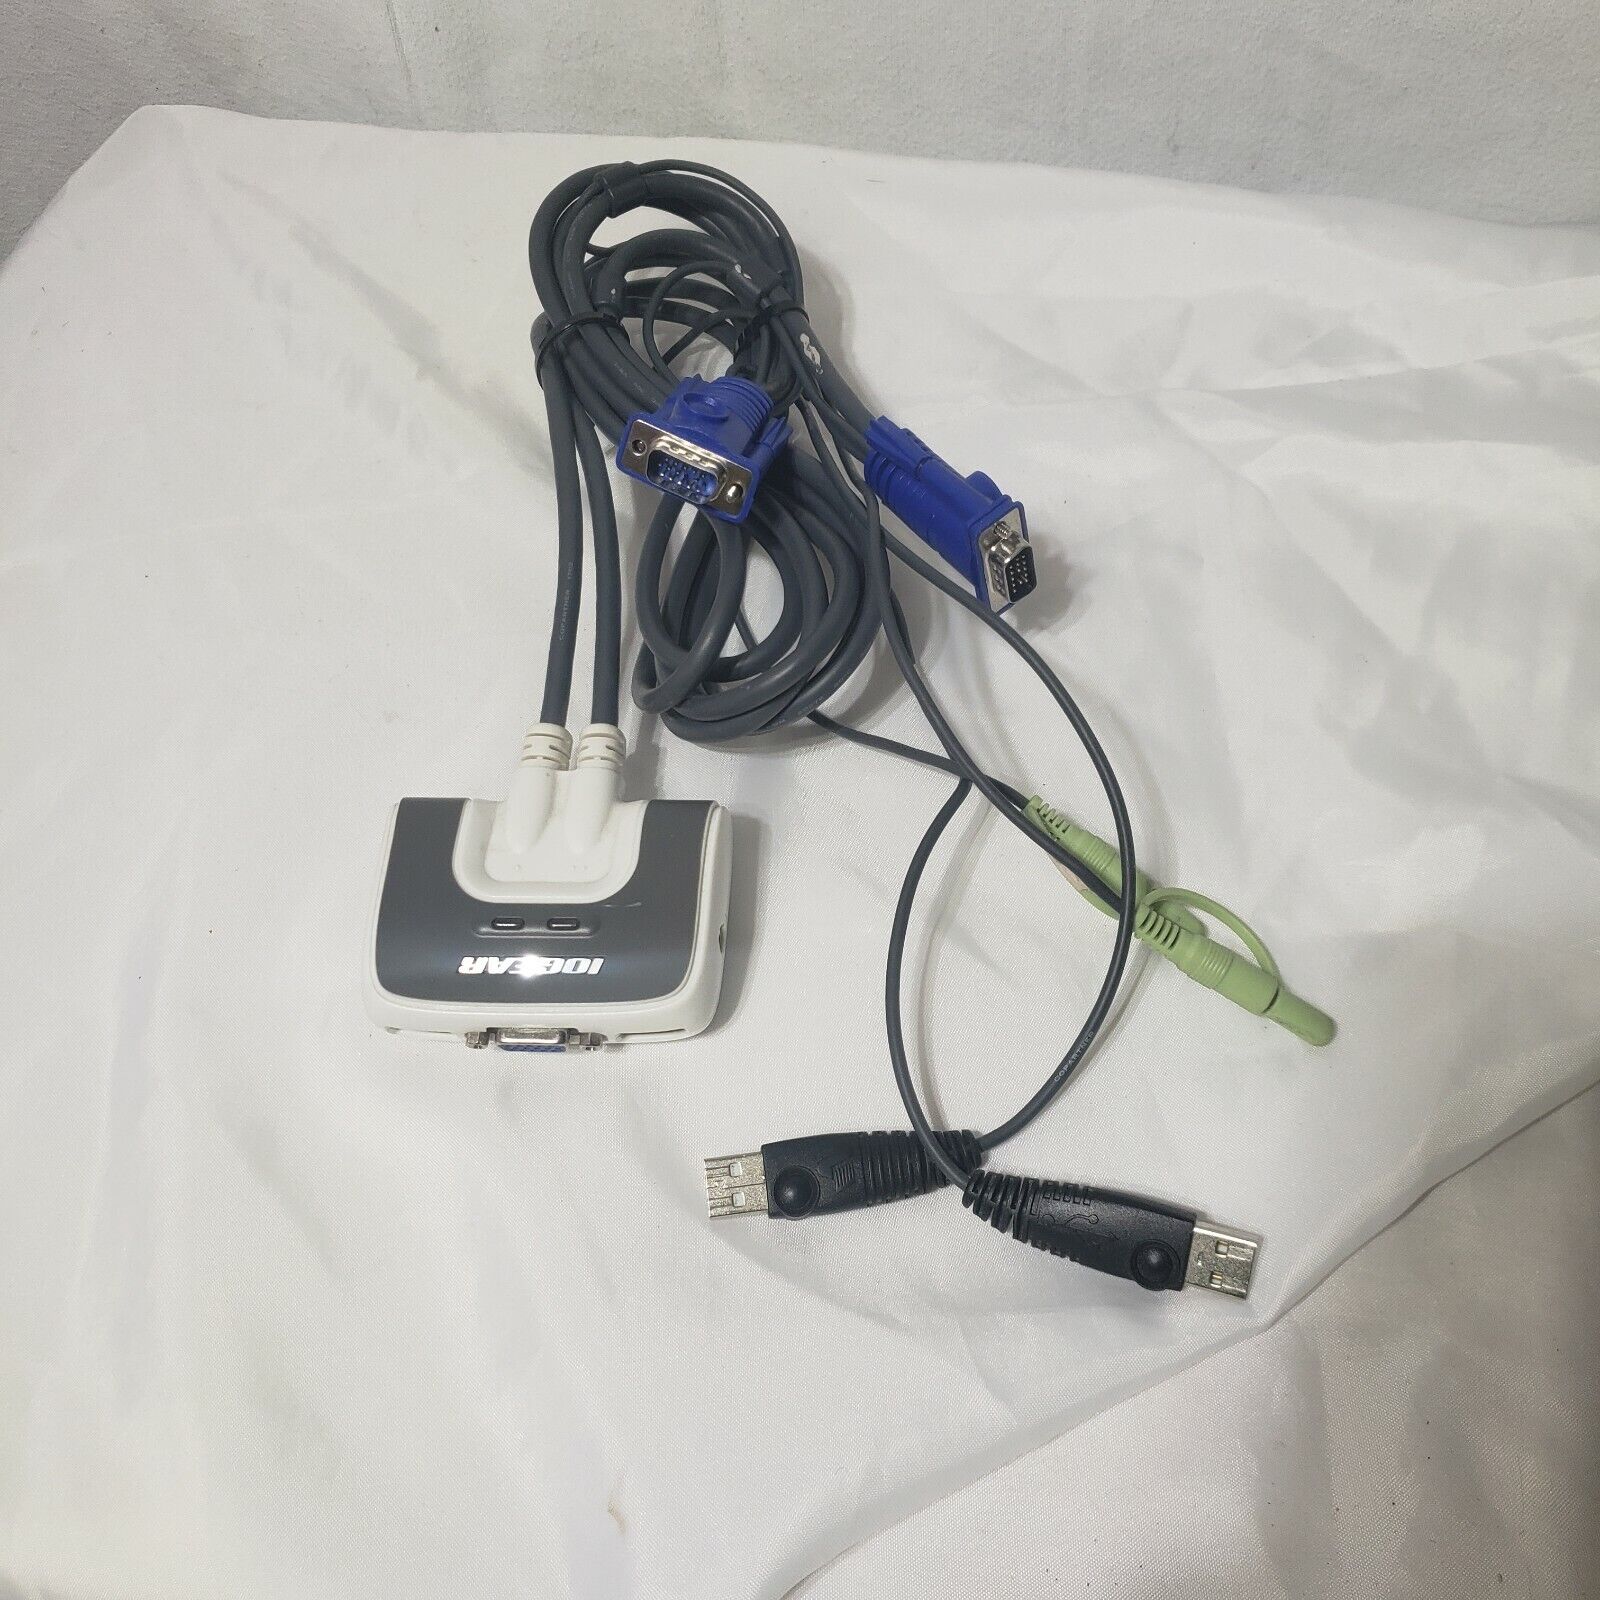 IOGEAR GCS632U 2-PORT USB Compact KVM Switch Box and Cables Tested 